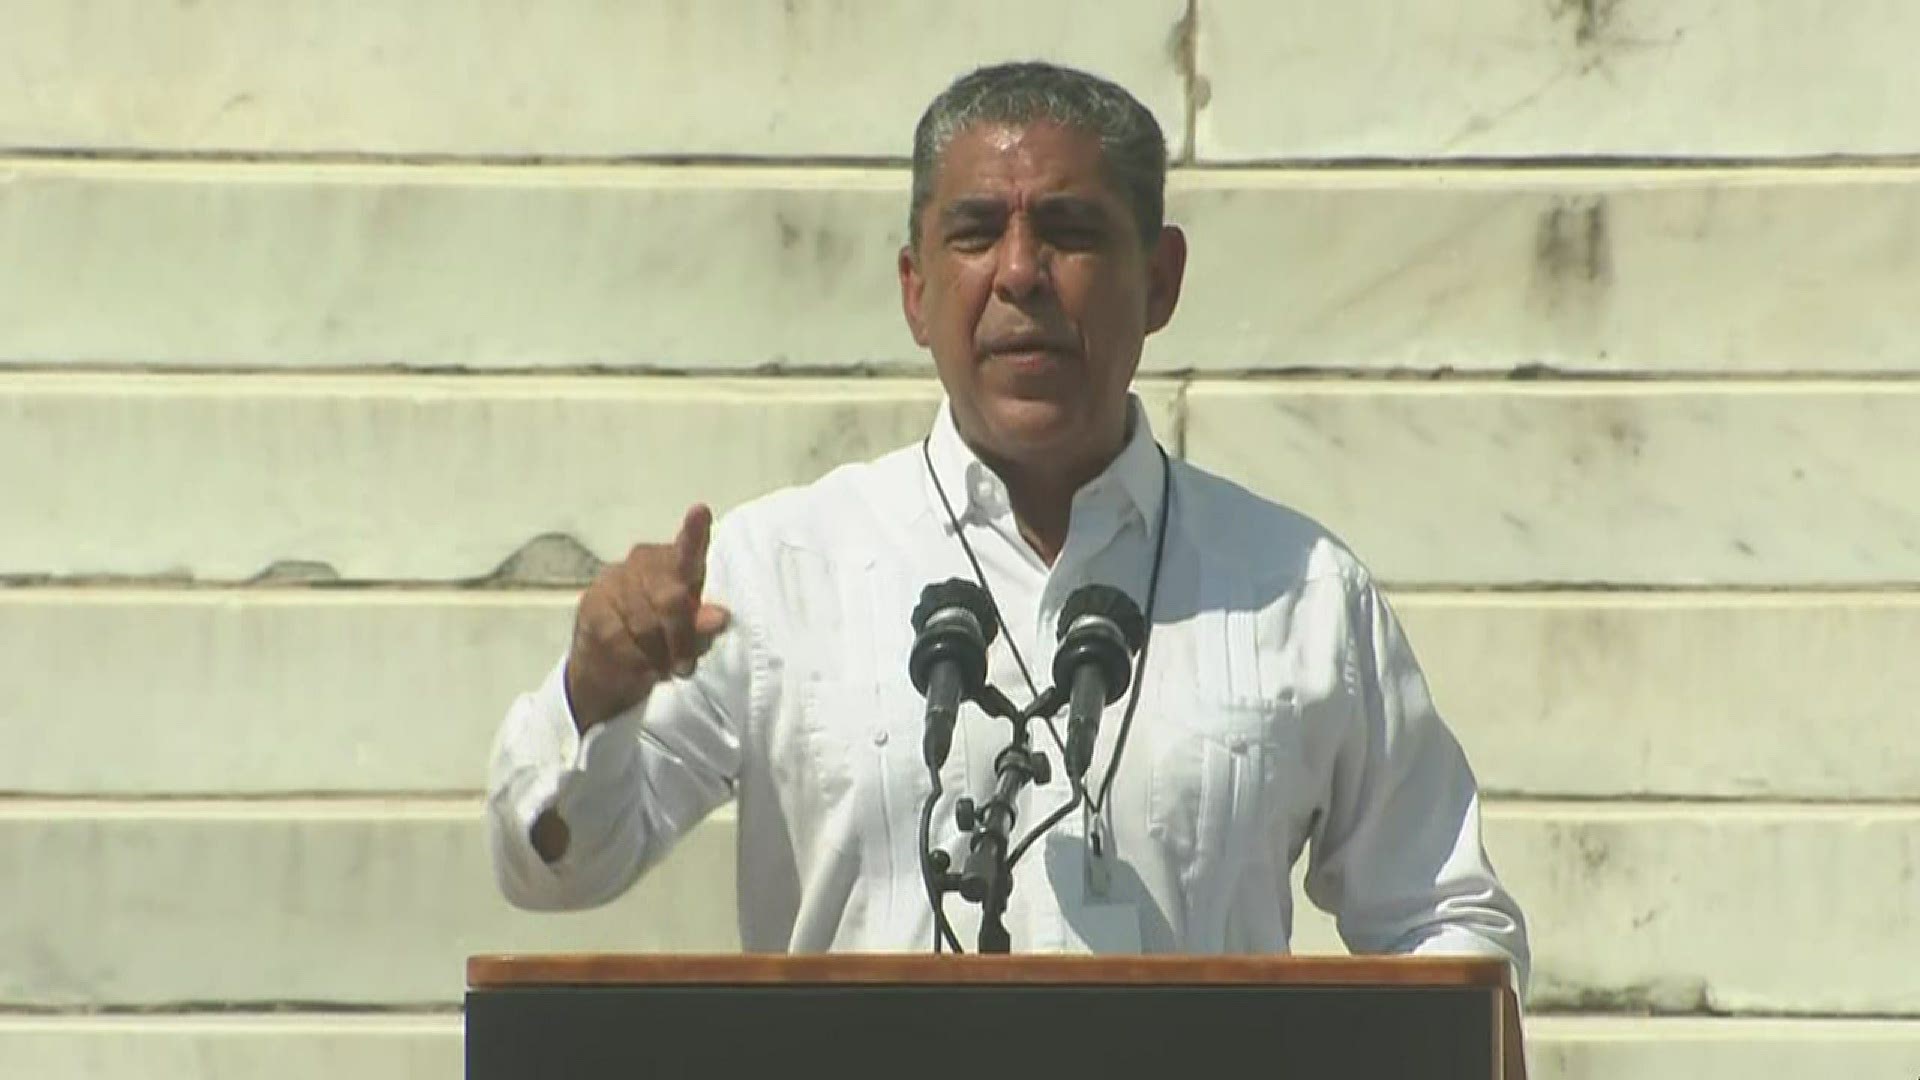 Rep. Adriano Espaillat of New York, stands in solidarity with African American's fight for equality and justice.